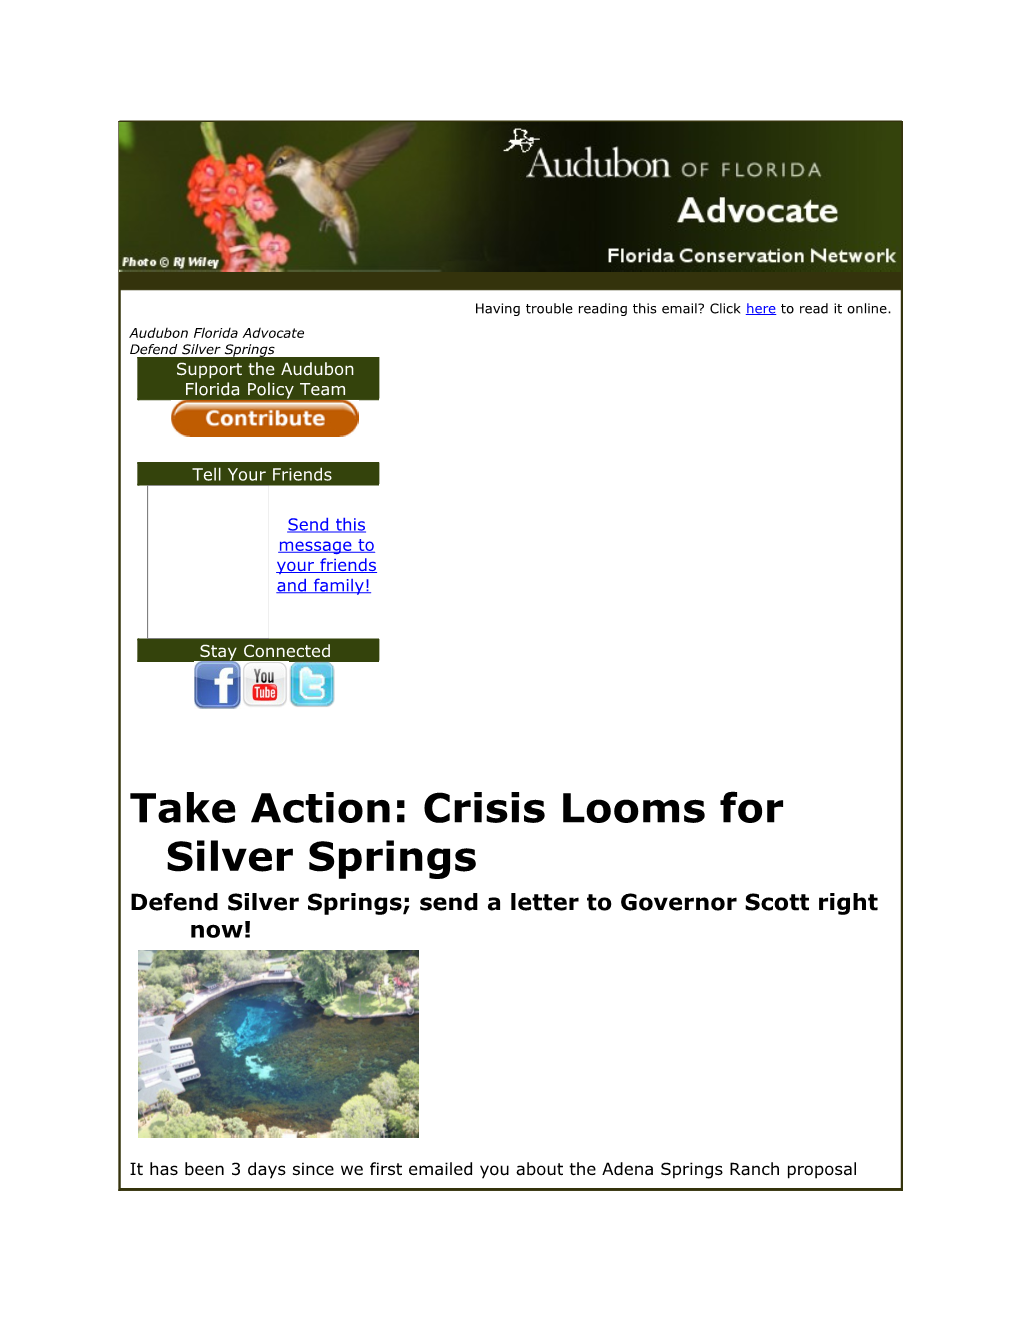 Take Action: Crisis Looms for Silver Springs